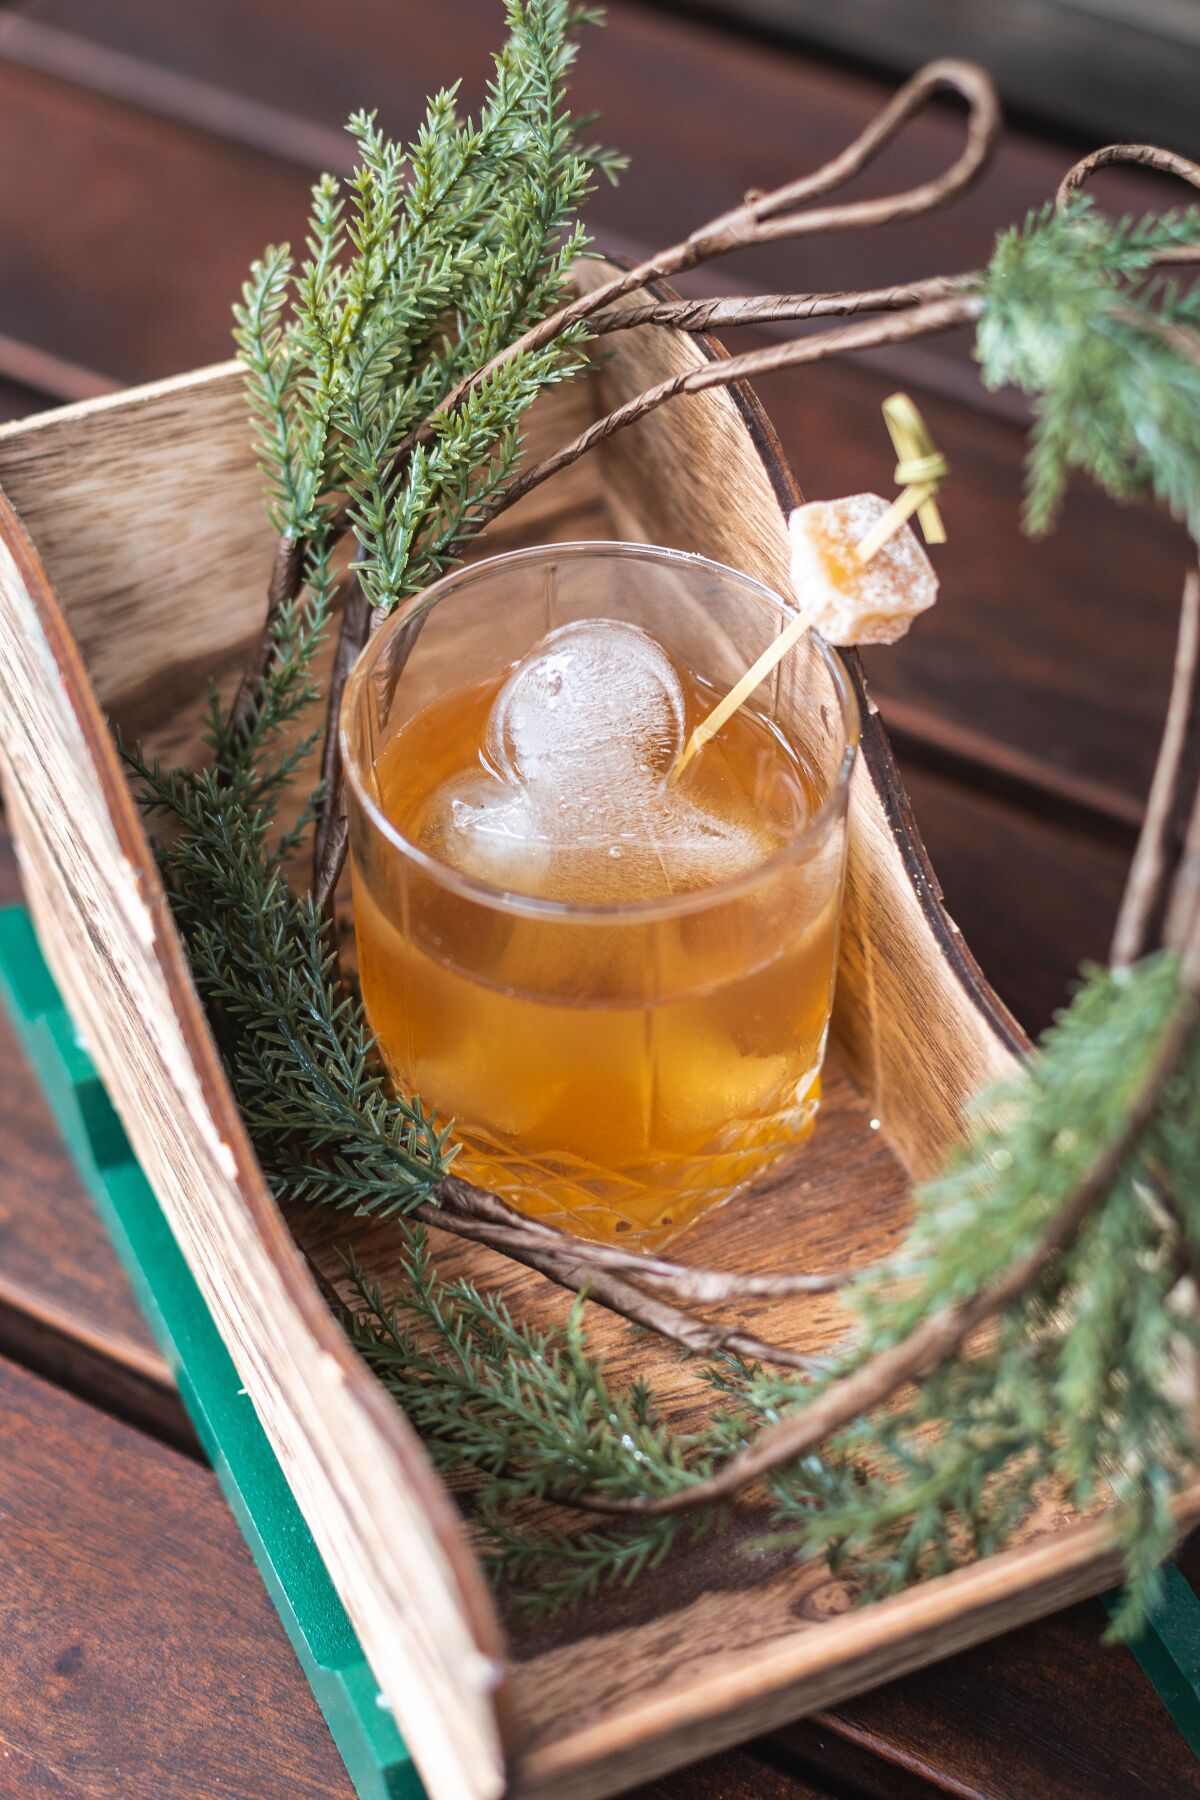 The Gingerbread Man Old Fashioned from Eureka!